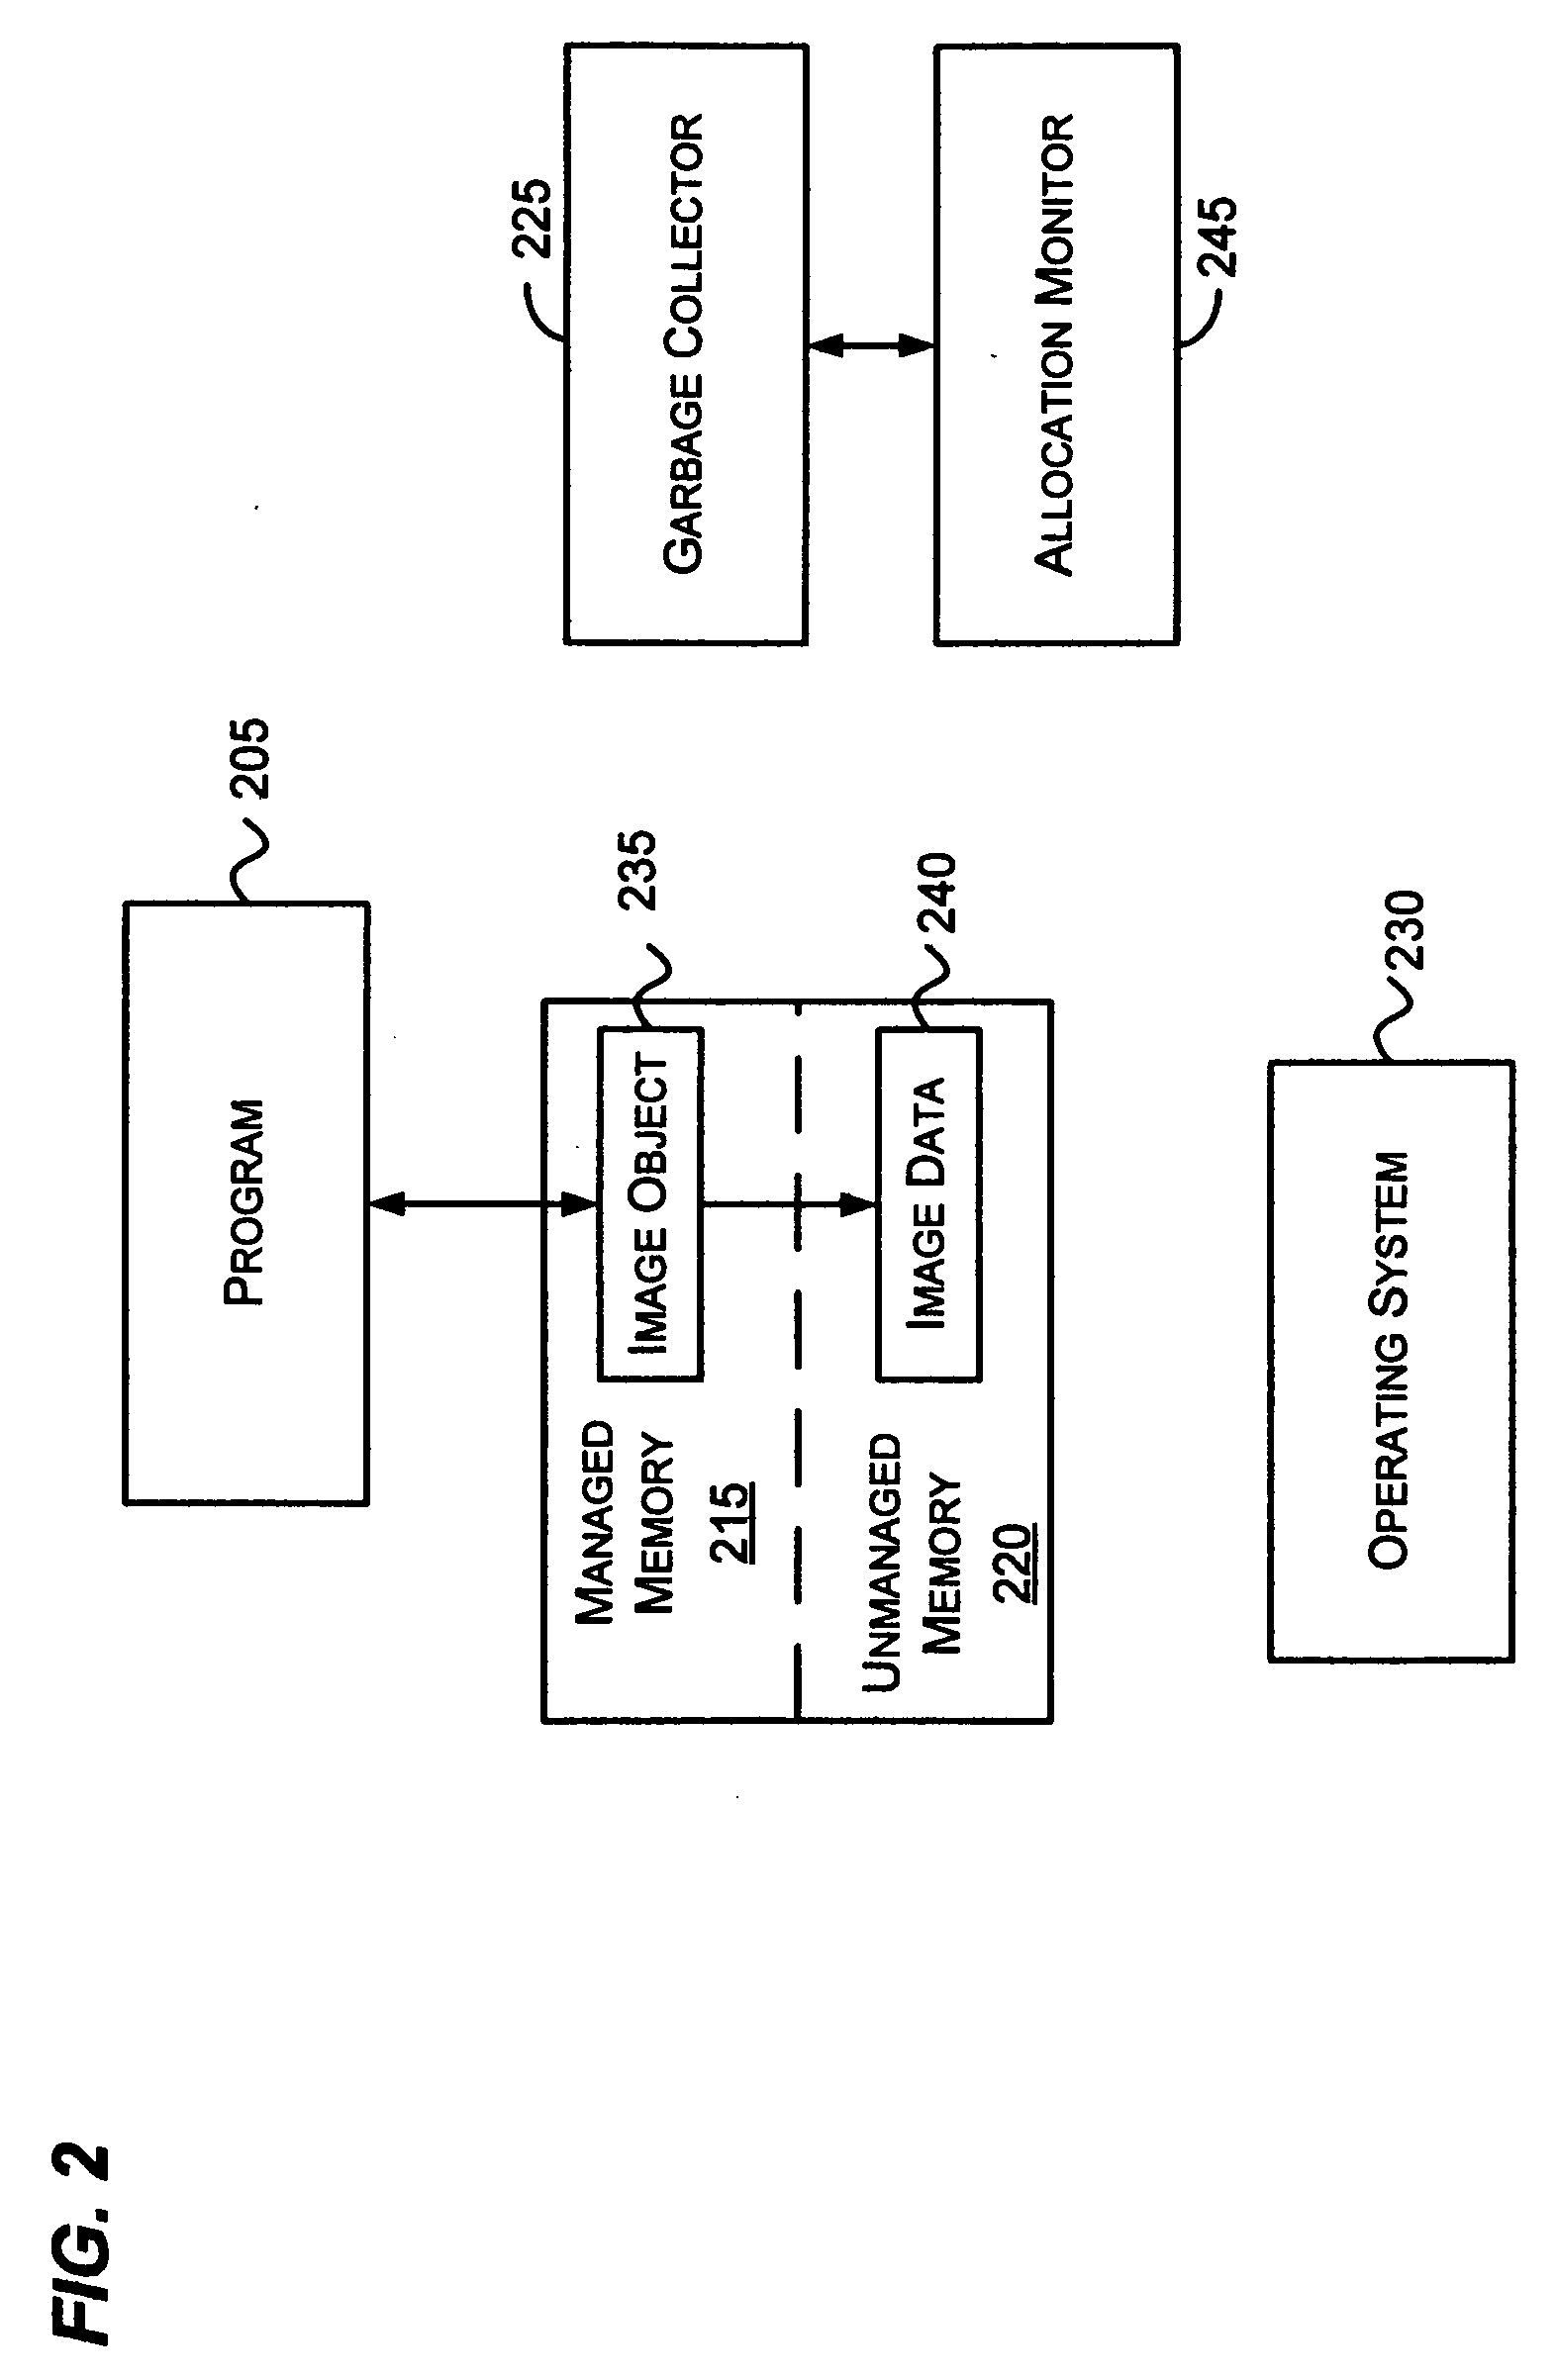 Implementation for collecting unmanaged memory